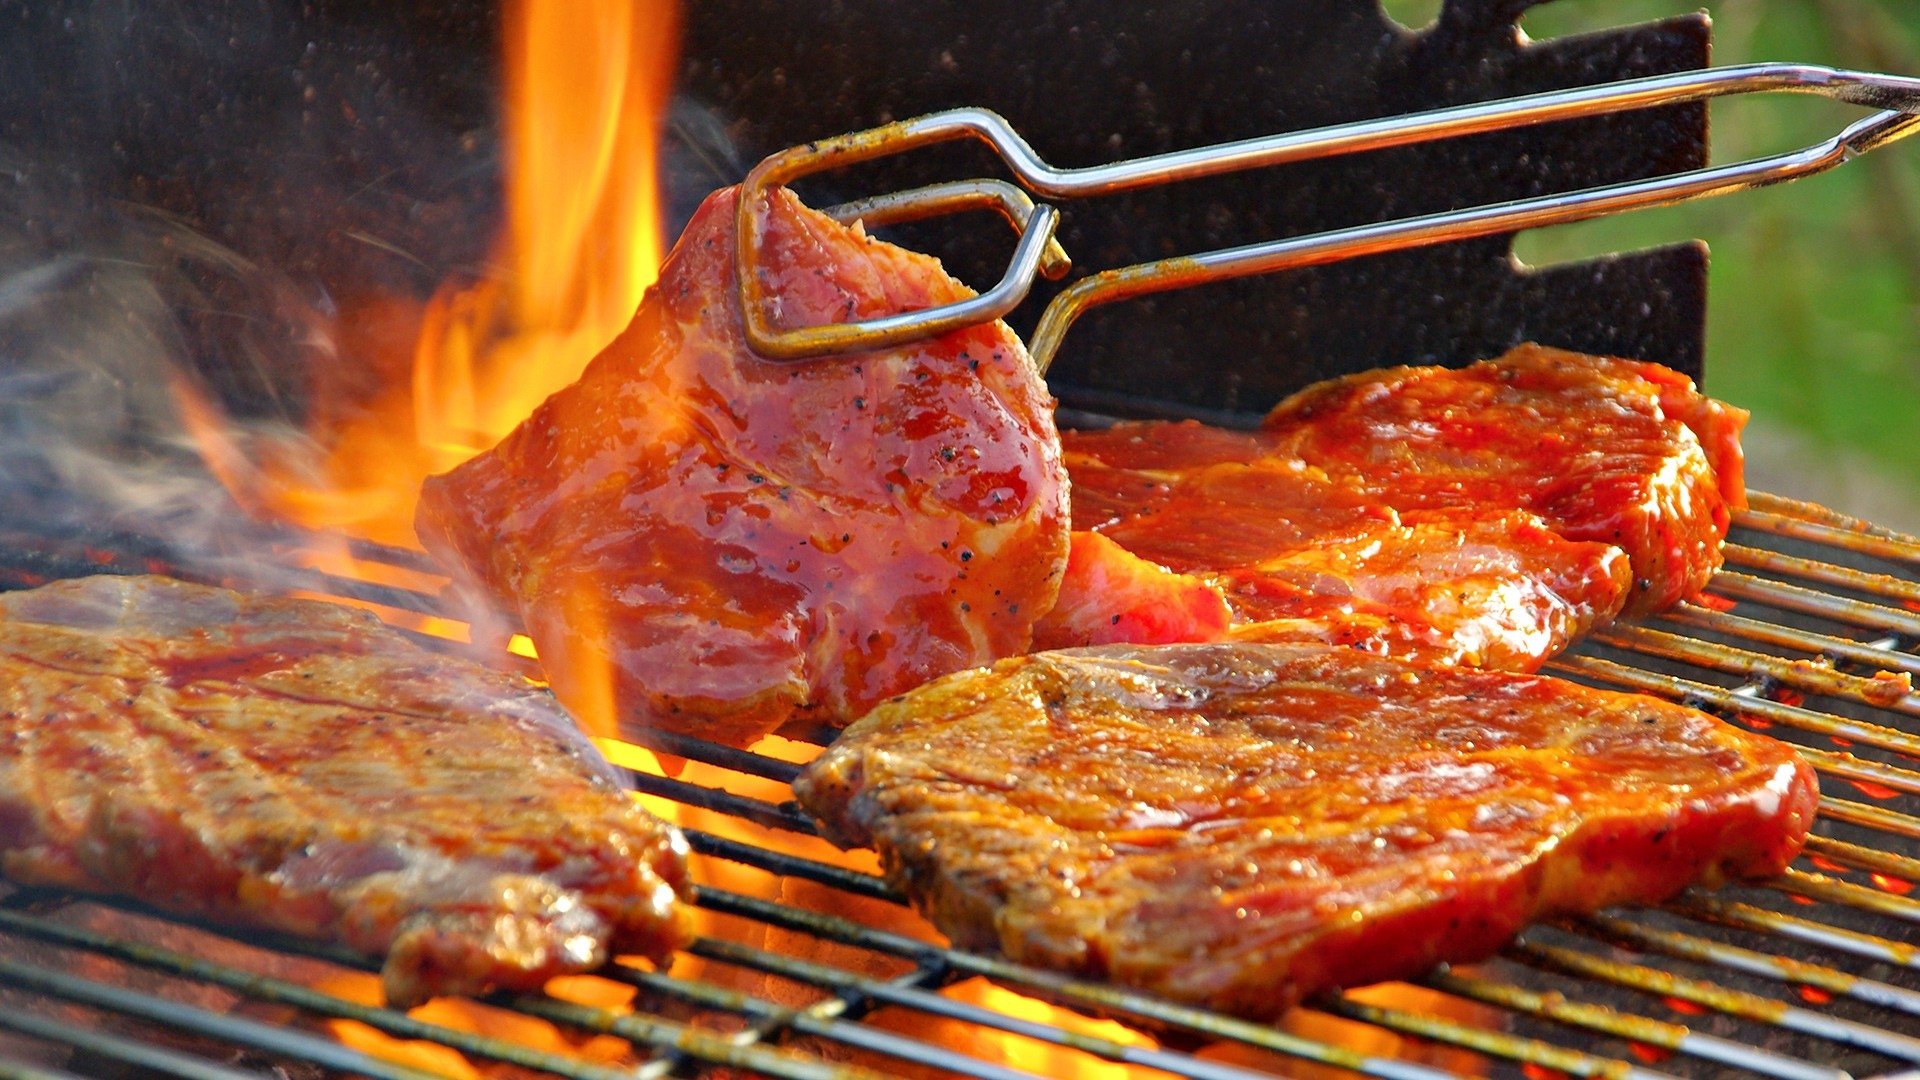 Barbecue HD Wallpaper Background Image